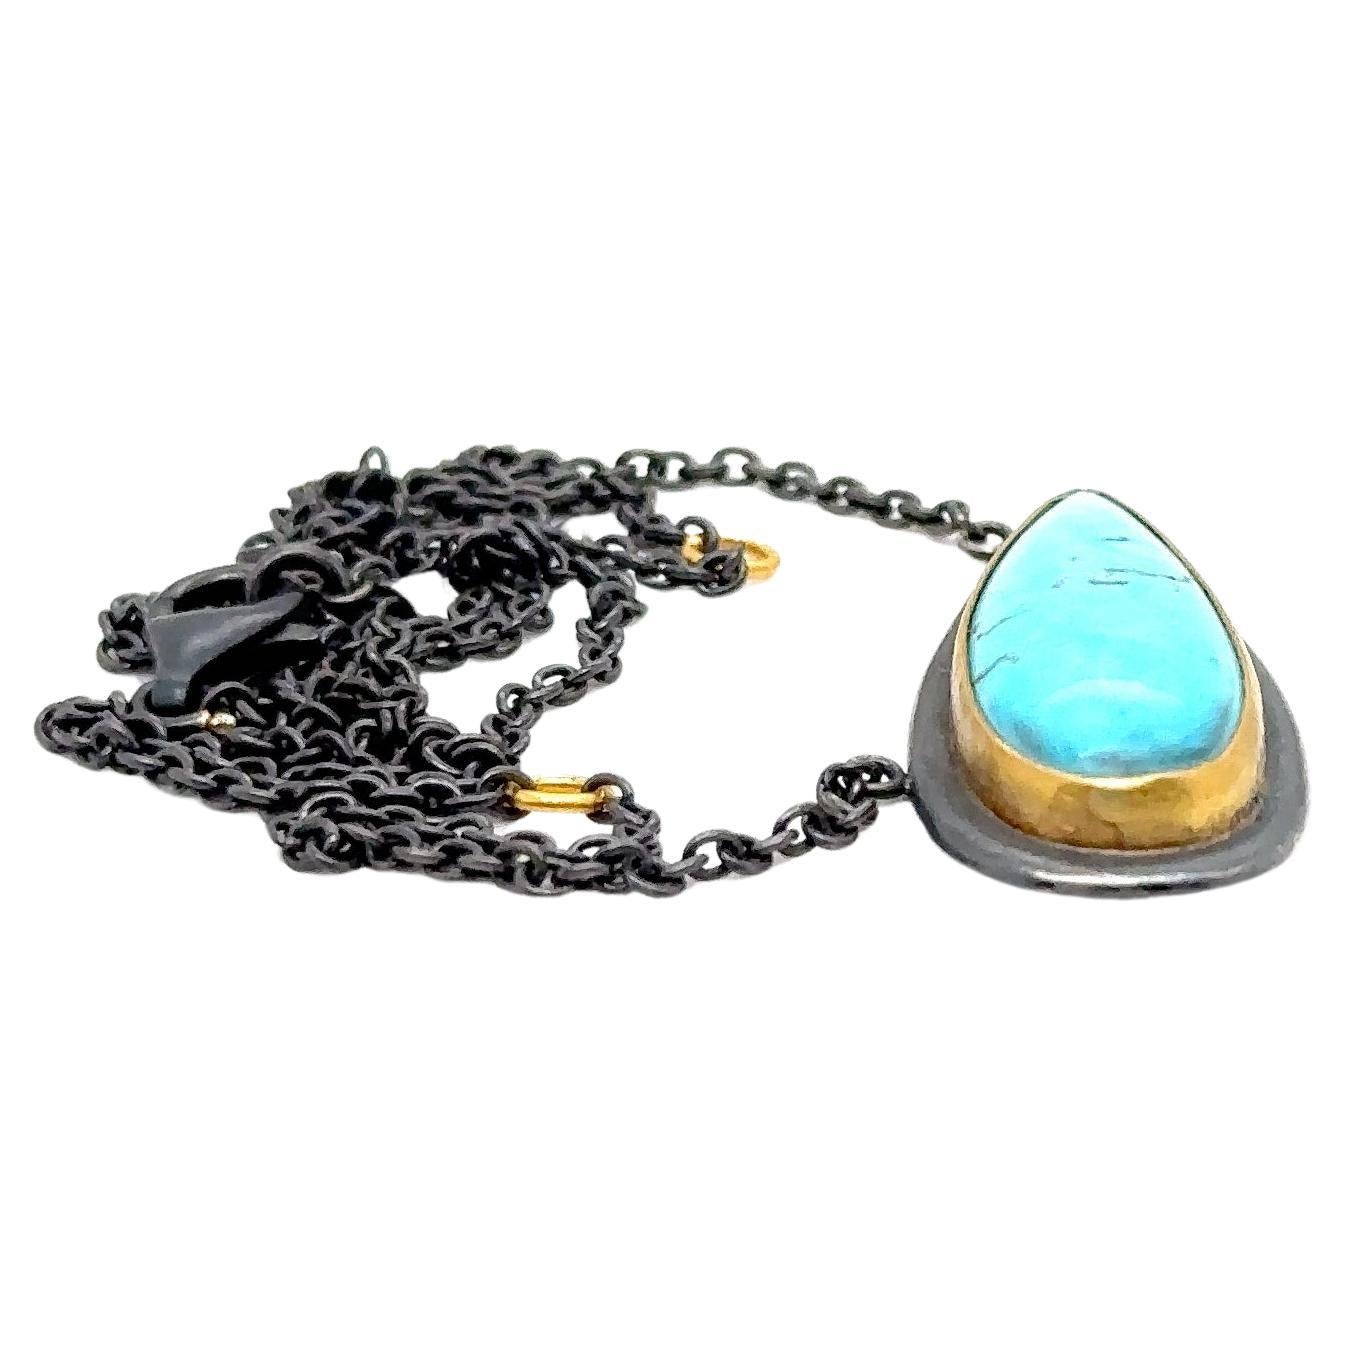 JAS-17-1525 - 24K/SS HANDMADE NECKLACE w 30X10MM NATURAL KINGMAN TURQUOISE 